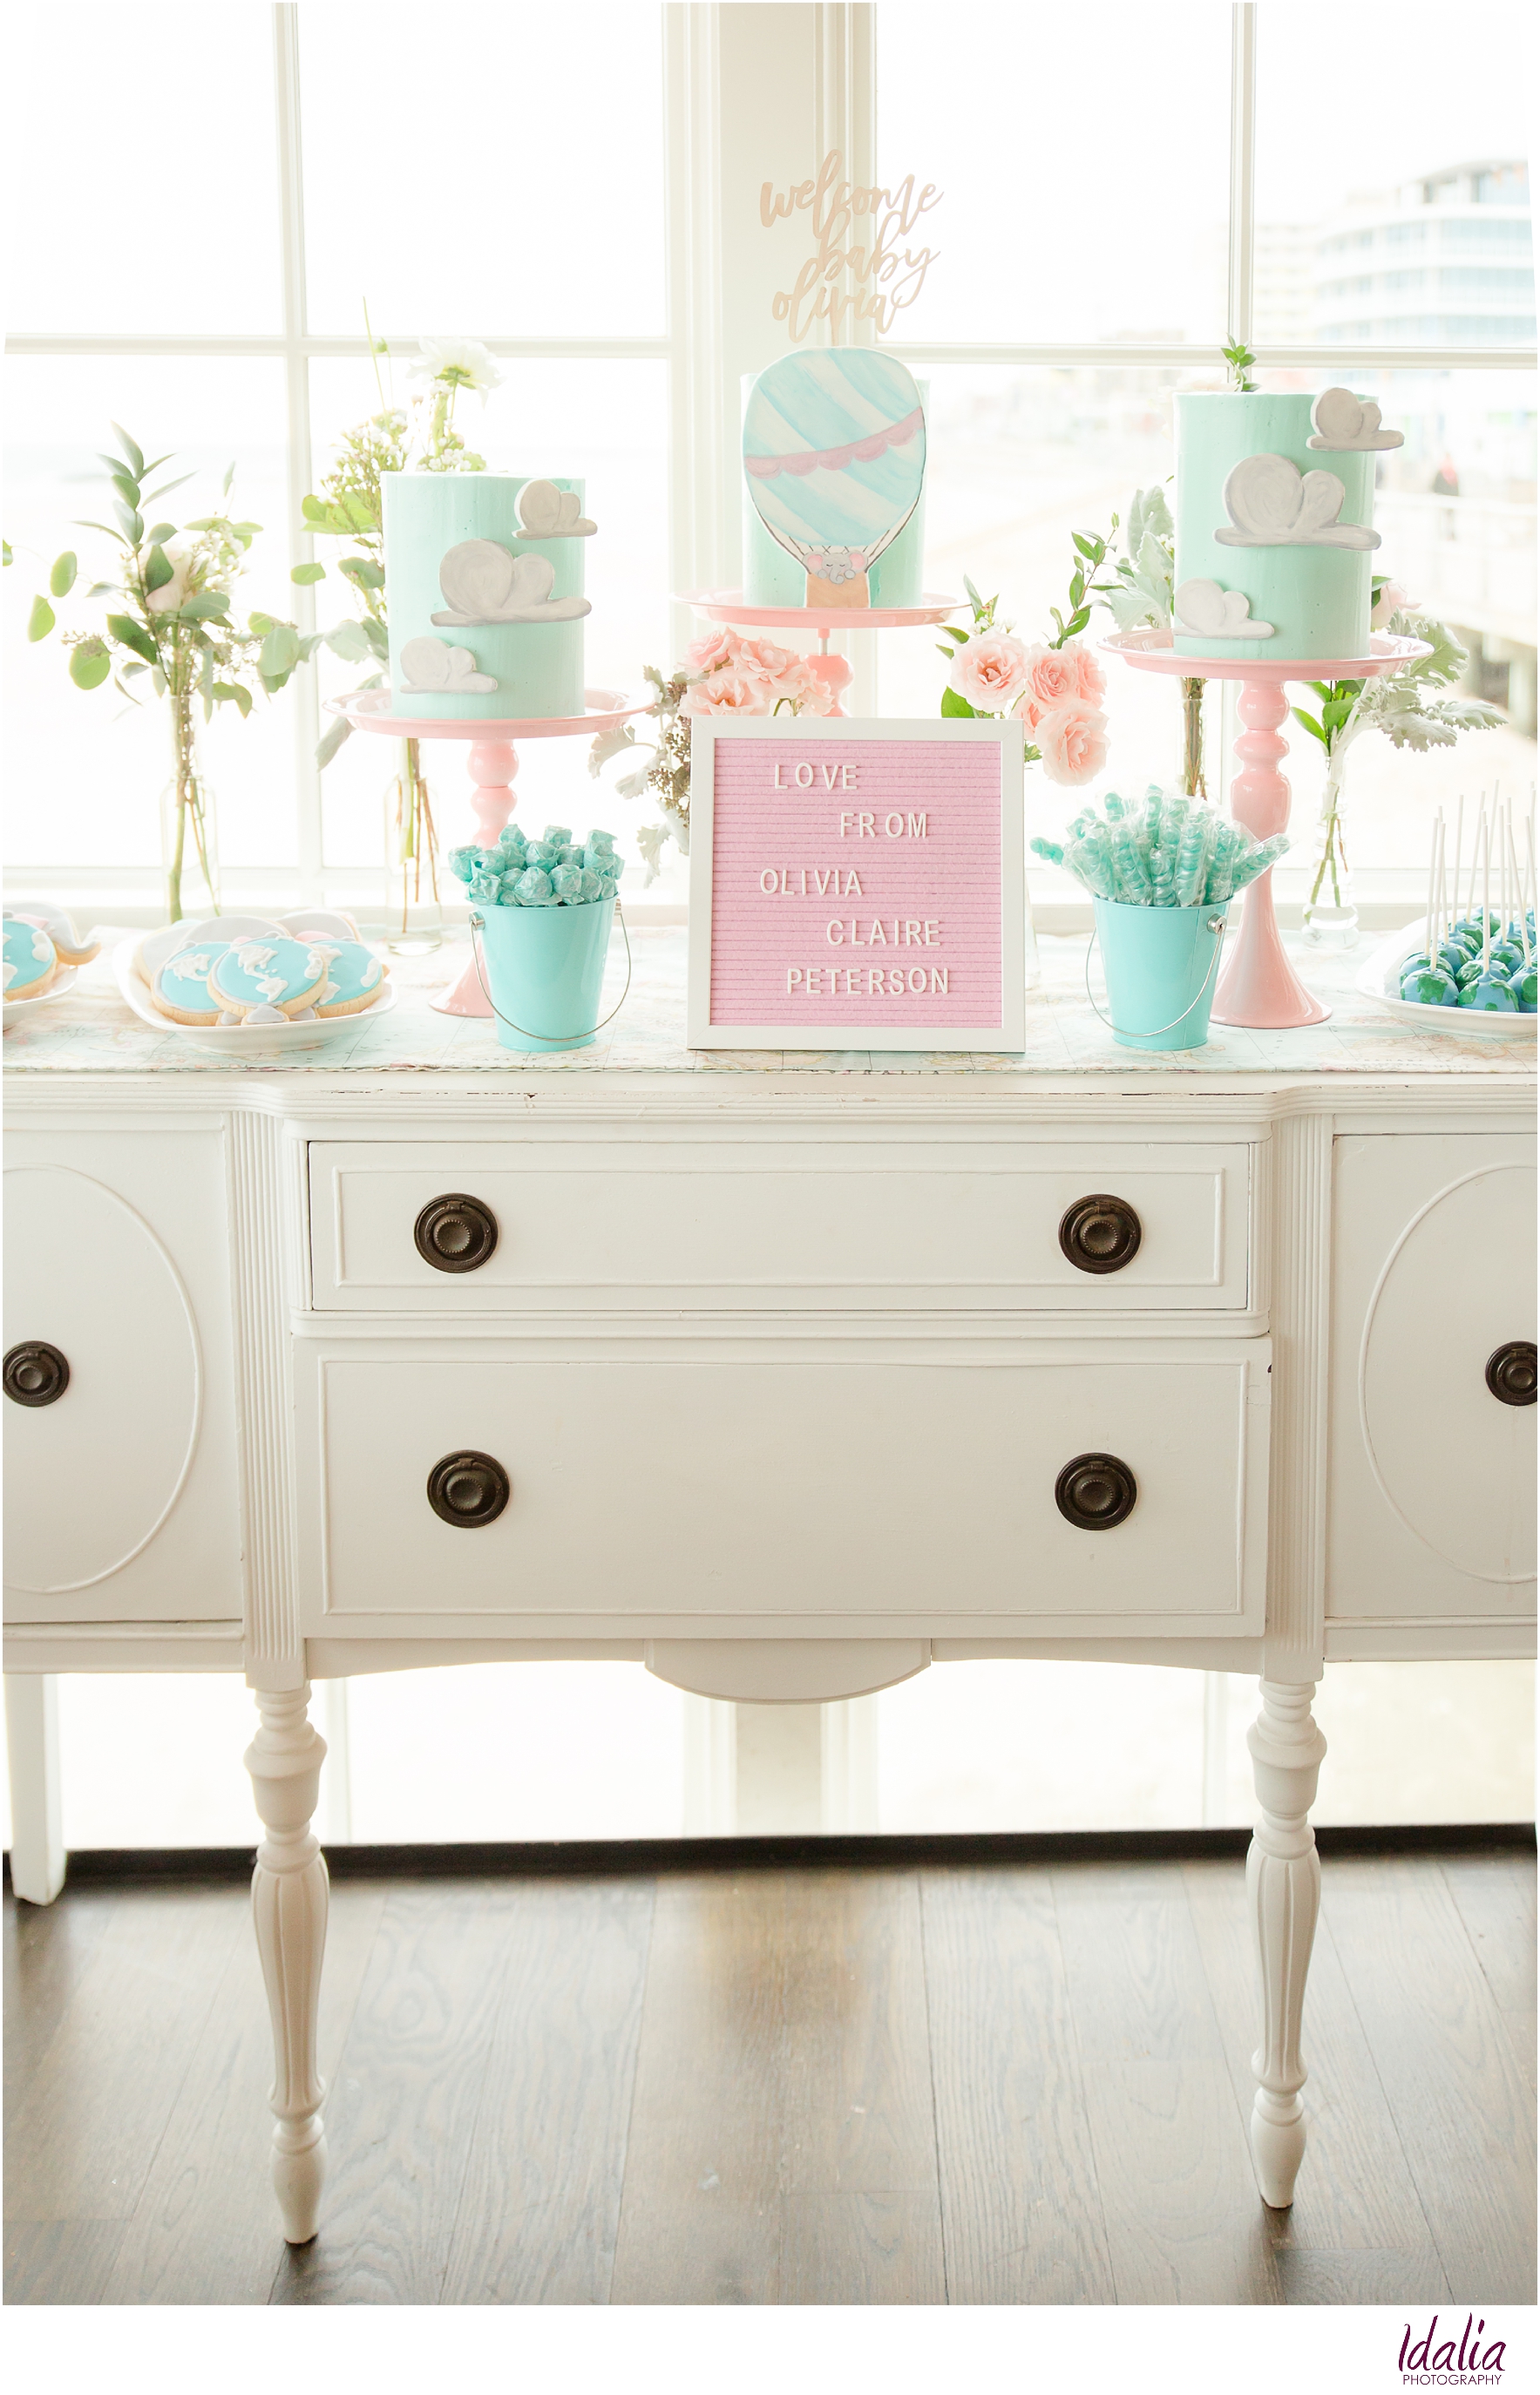 Travel-themed baby shower | Sweets bar by Bogath Events | Photo by Idalia Photography